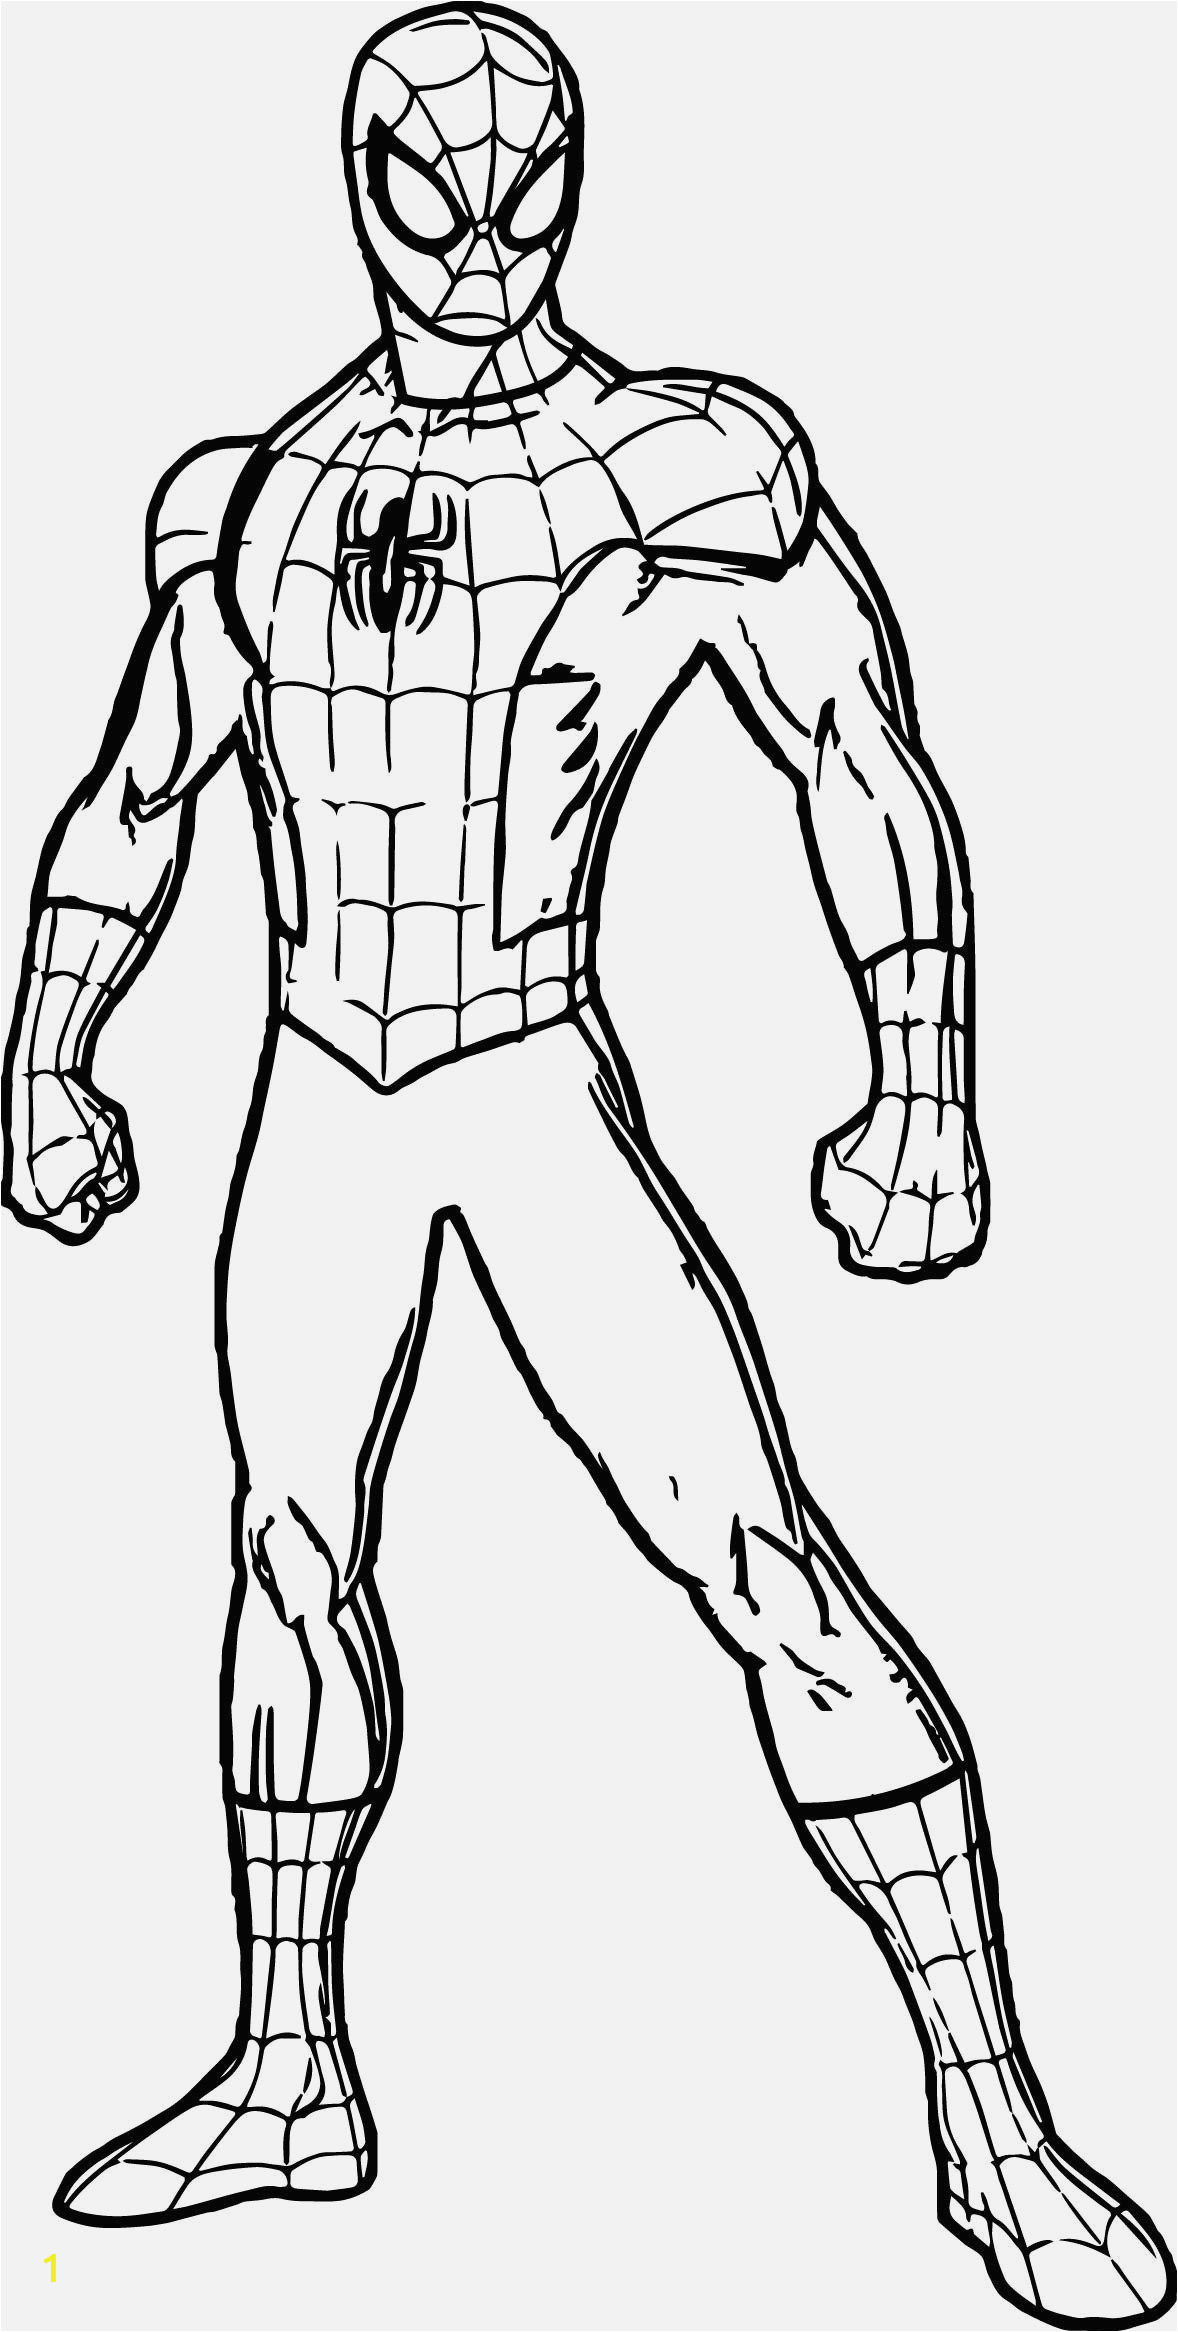 Spiderman Coloring Pages to Print Marvelous Image Of Free Spiderman Coloring Pages